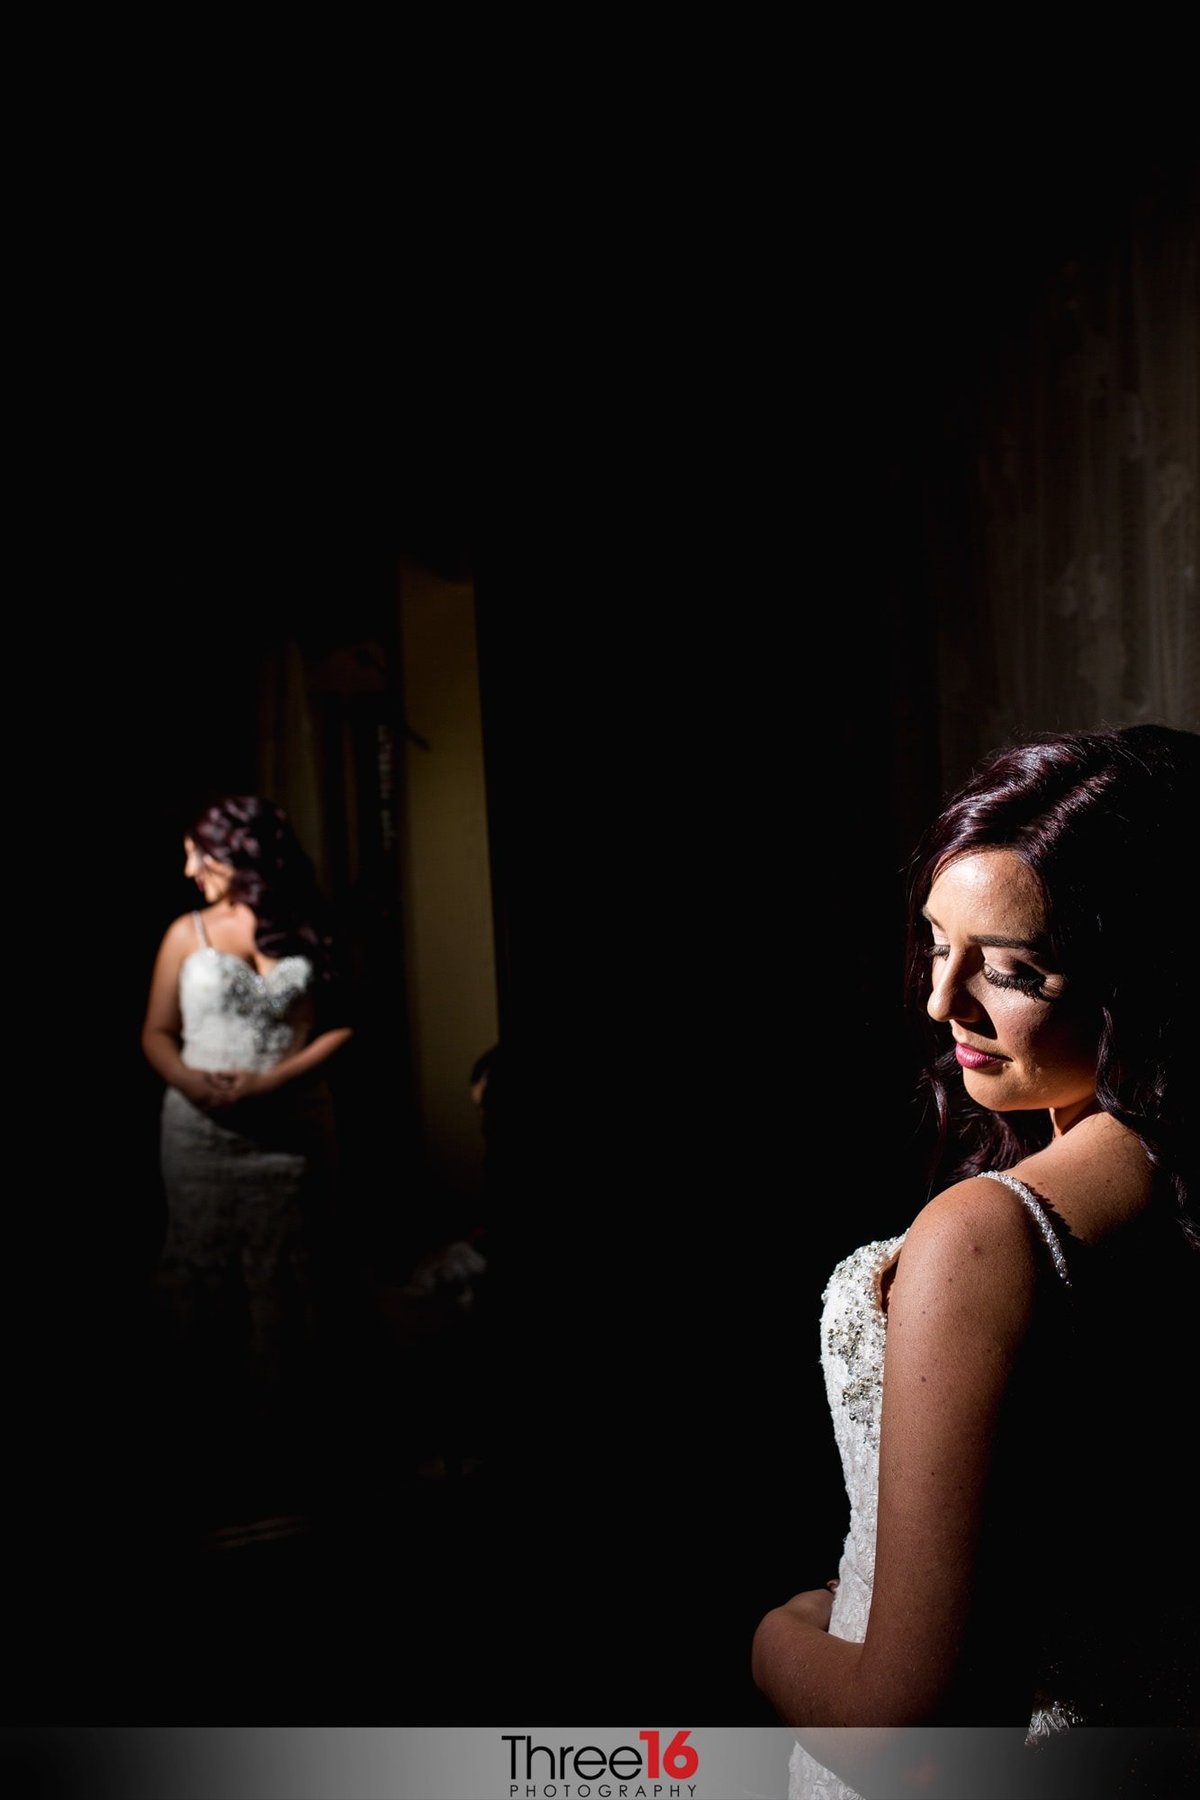 Bride spends a tender moment alone reflecting before her special day